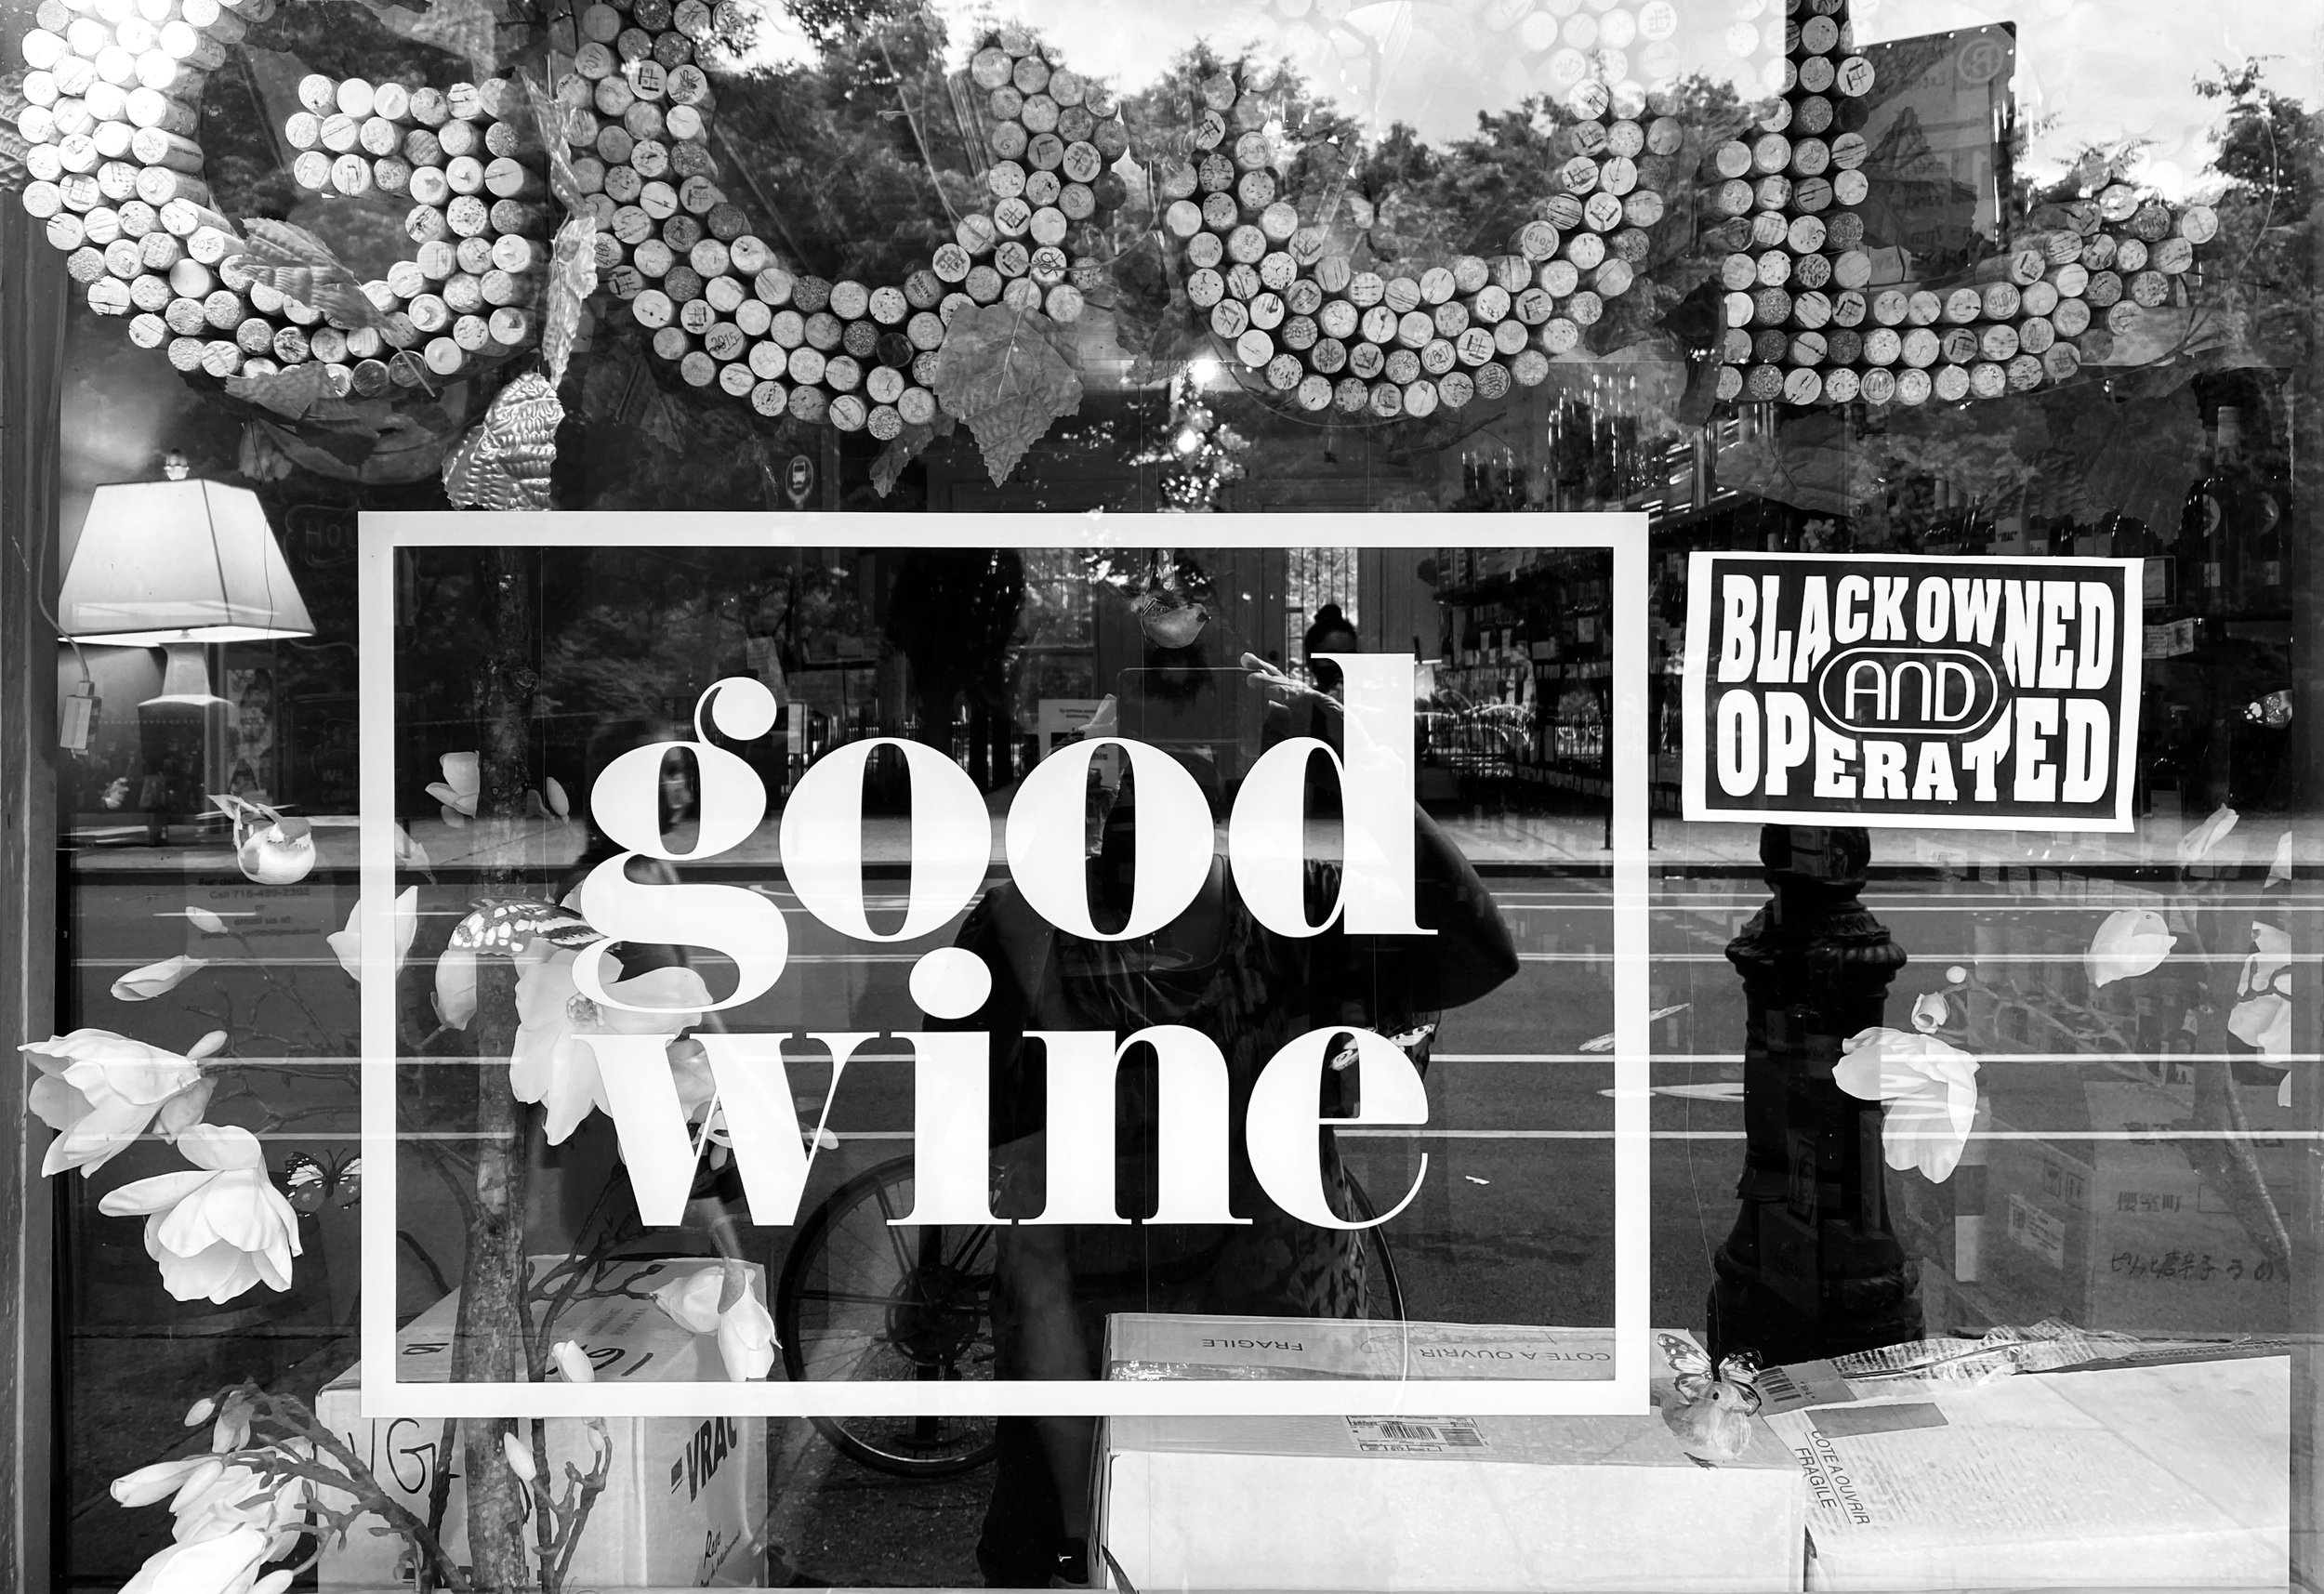 GW black owned operated sign in b & w IMG_8576.JPG